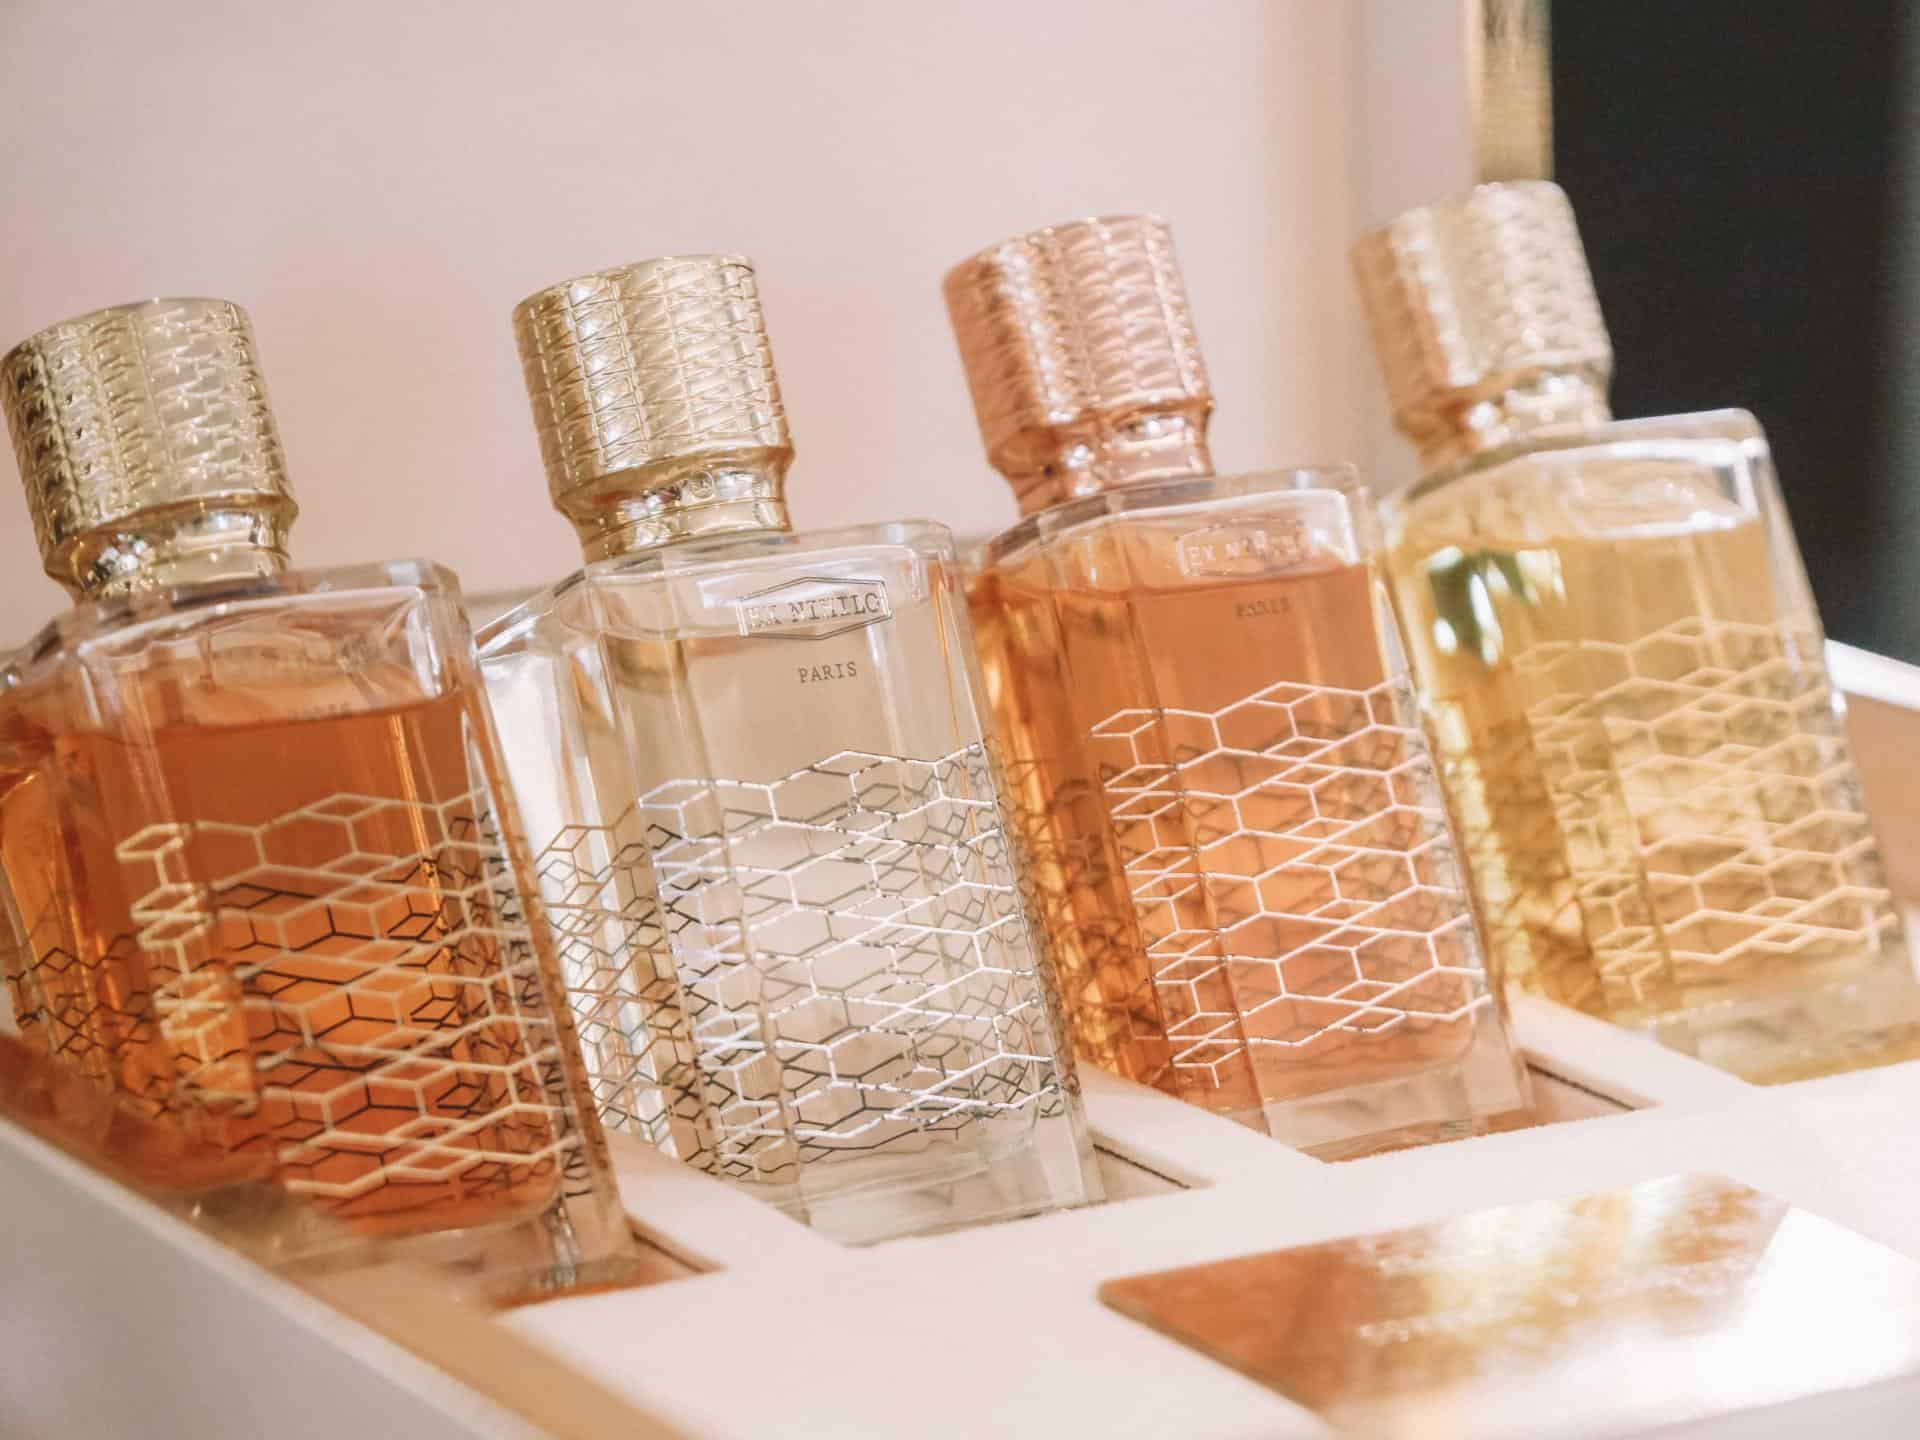 where to customize your own perfume in paris